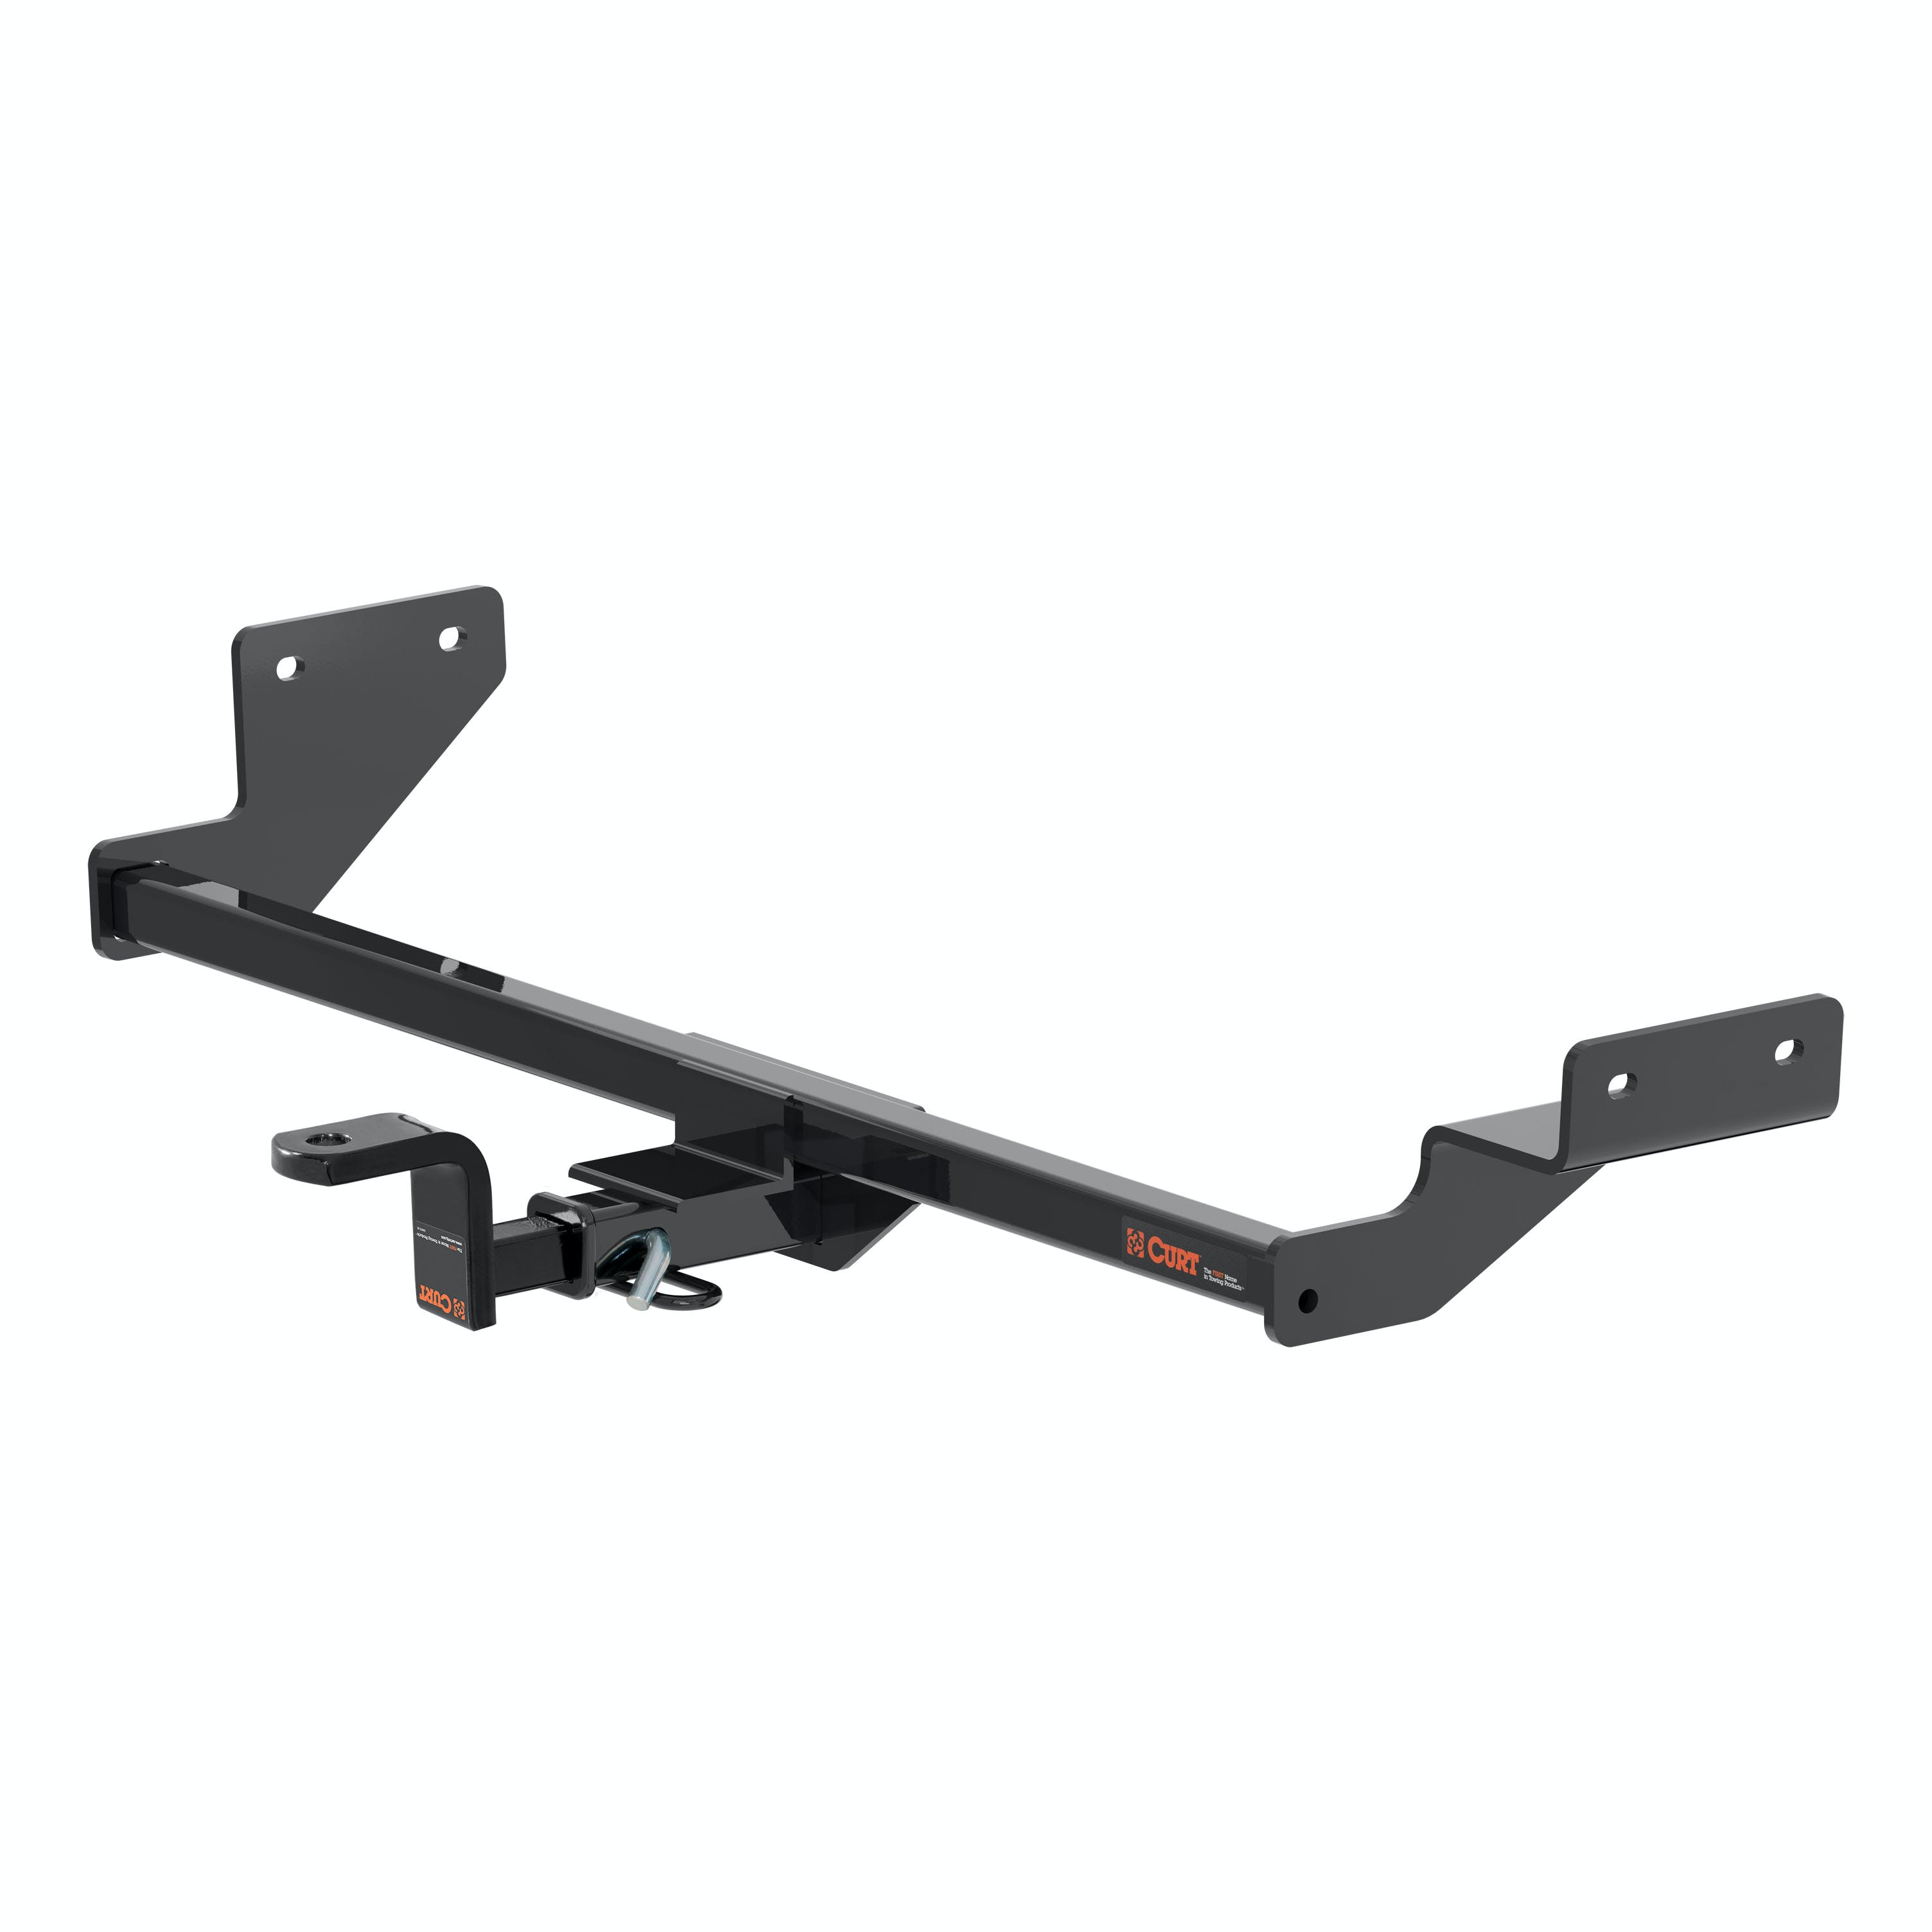 CURT 116153 Class 1 Trailer Hitch with Ball Mount